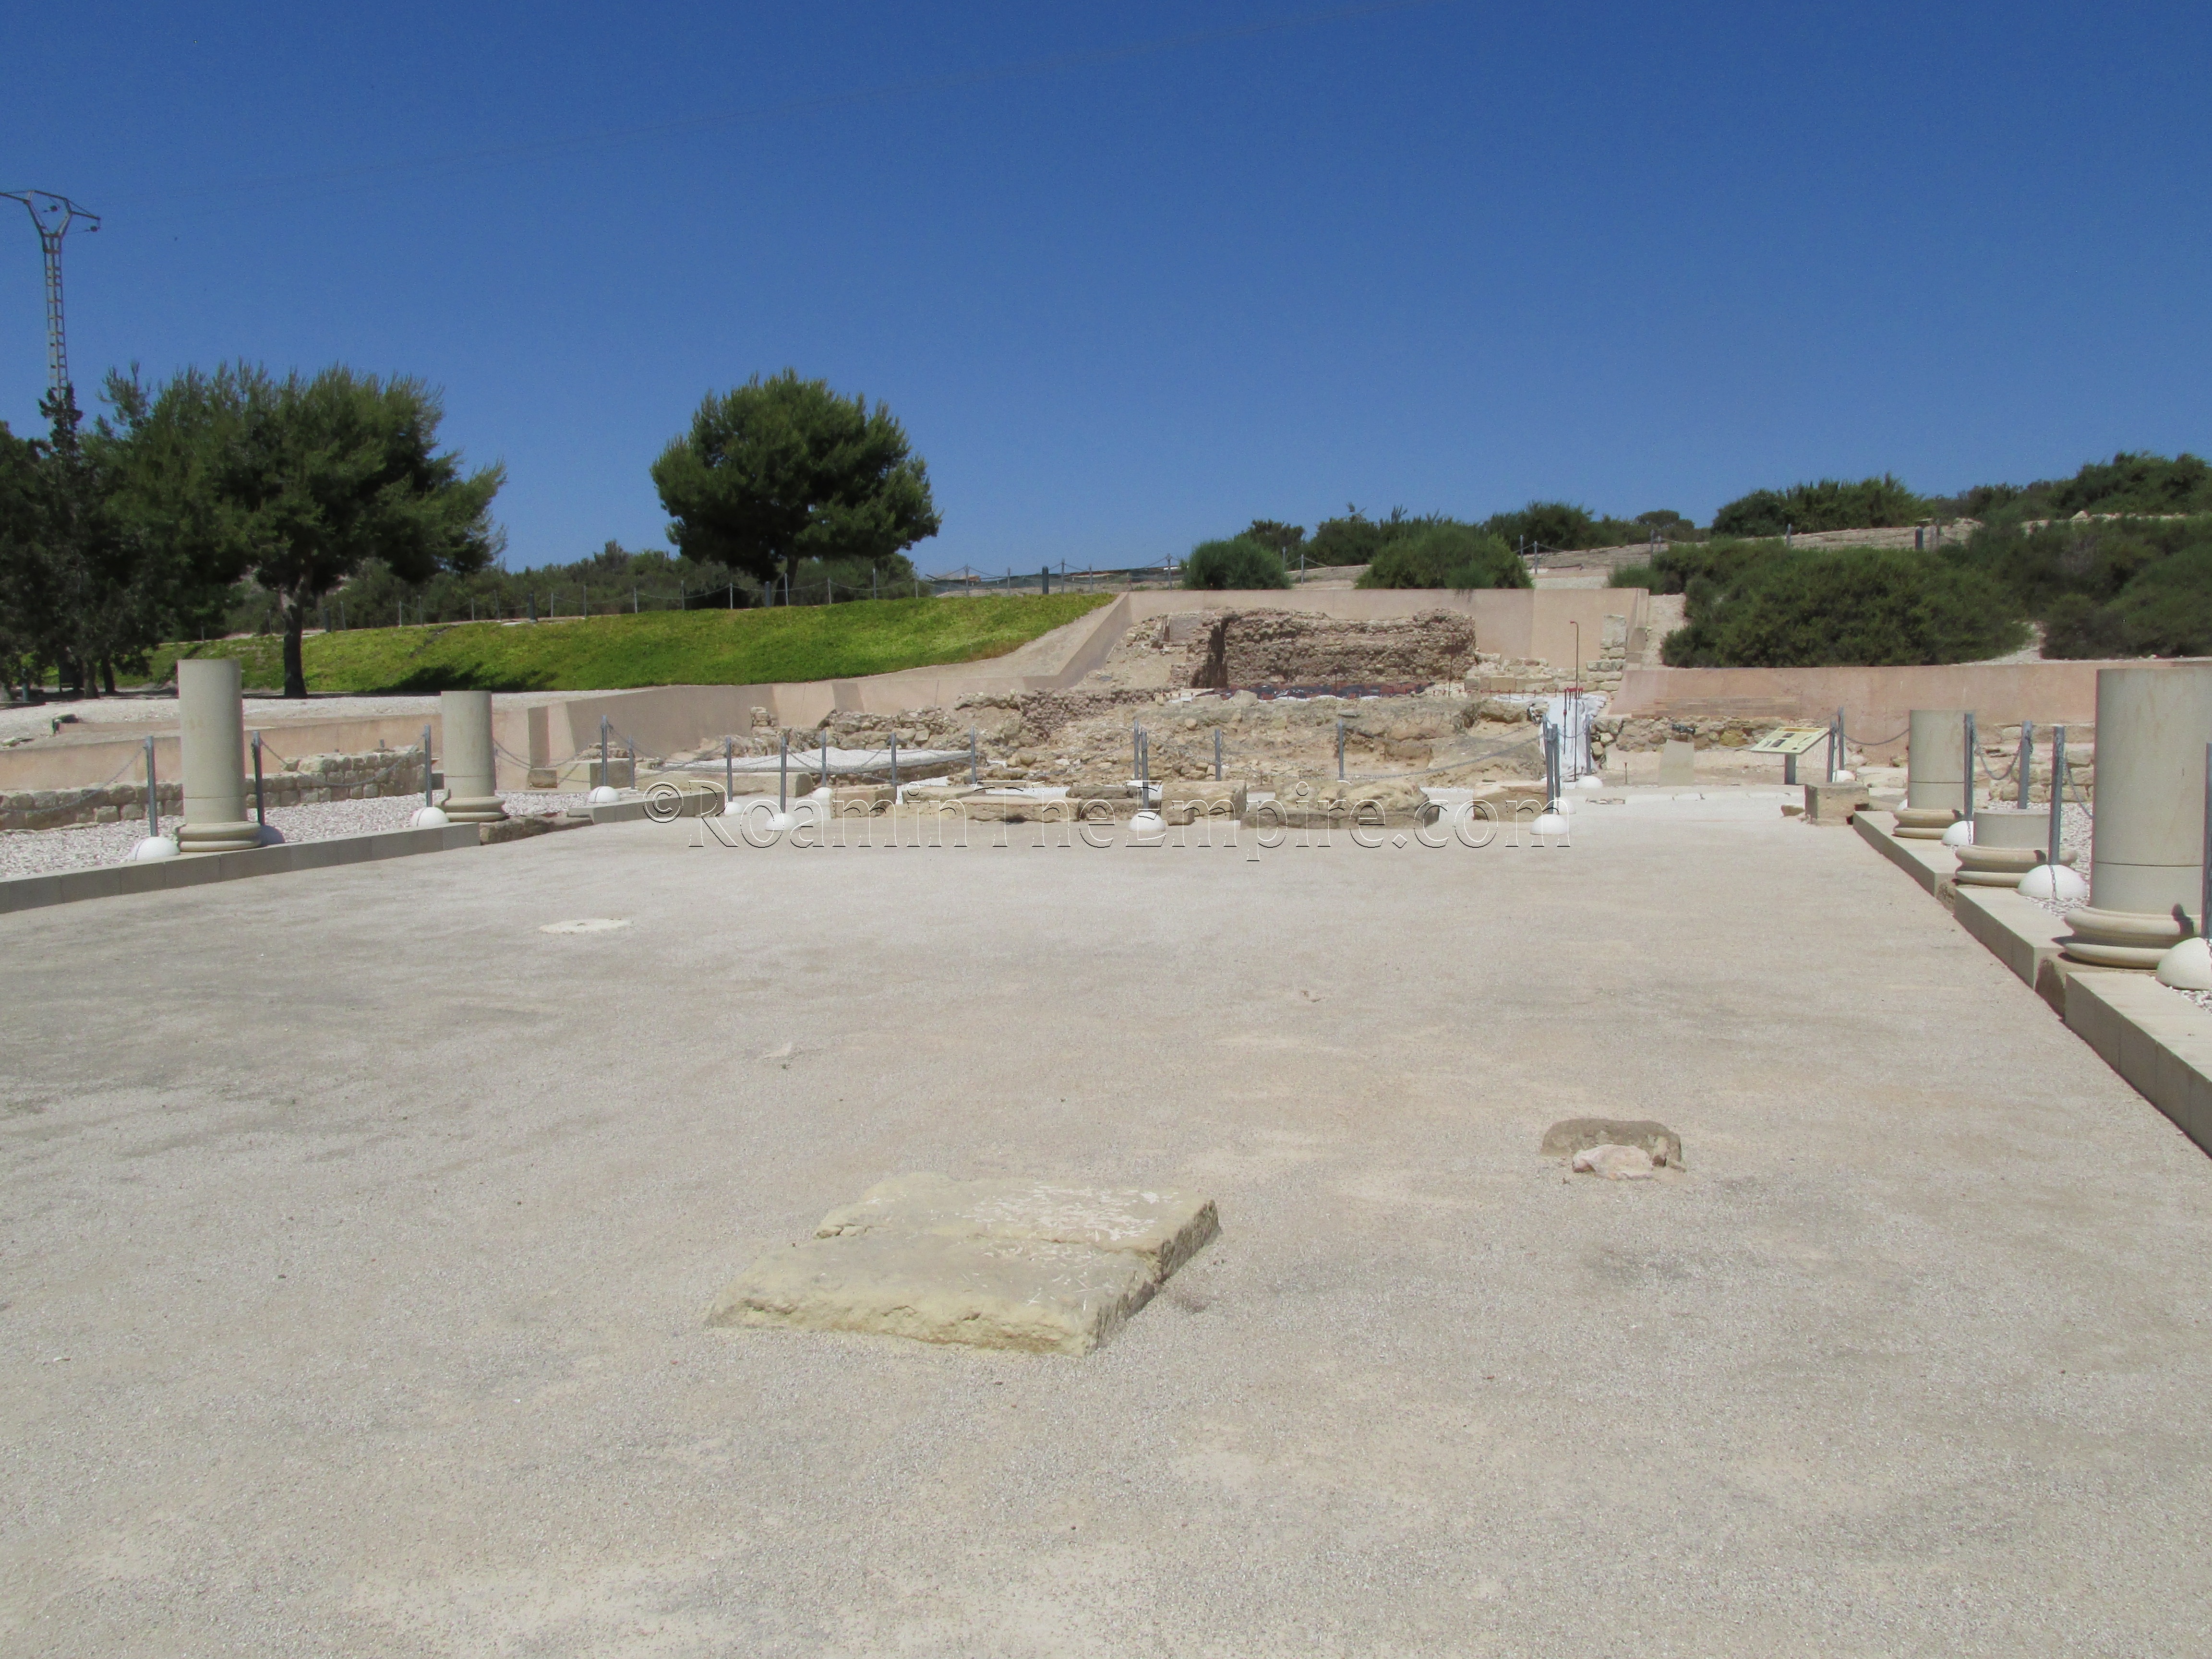 Forum and temple of Lucentum.